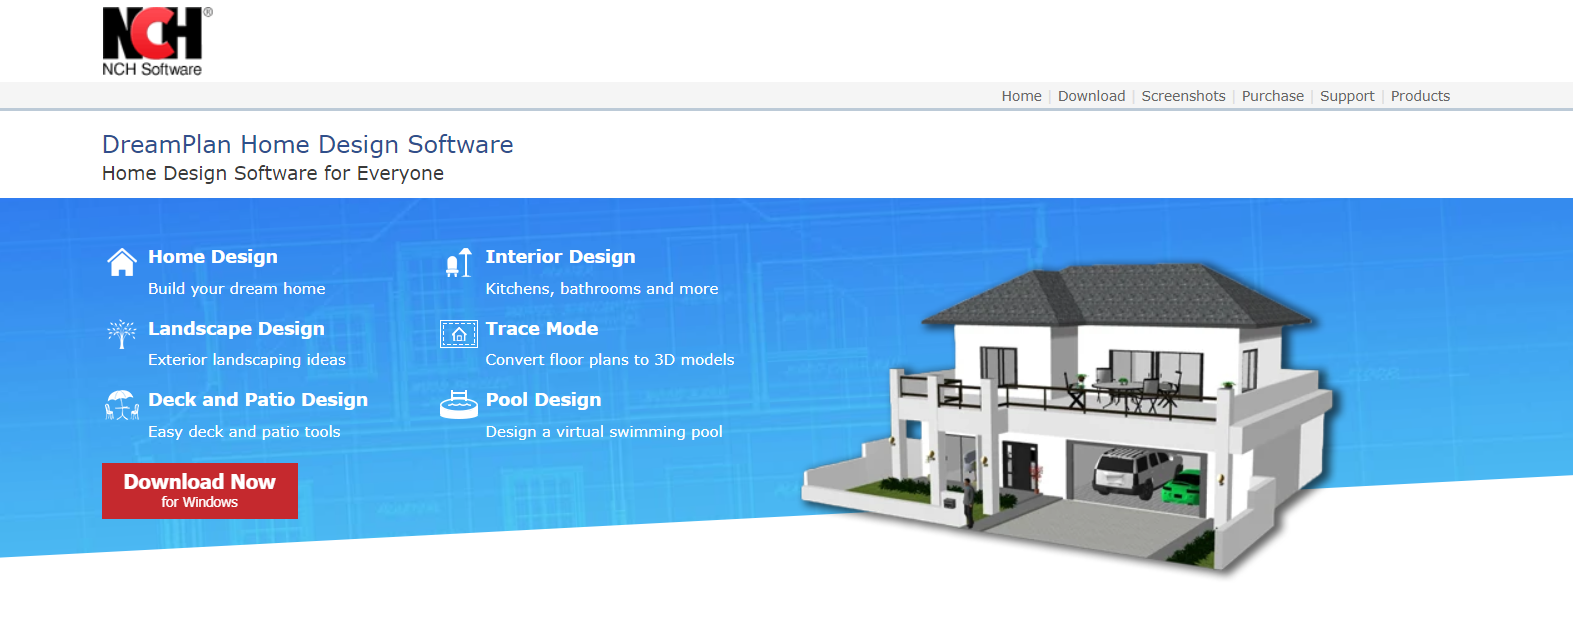 DreamPlan : Best Home Design Software for Mac Users